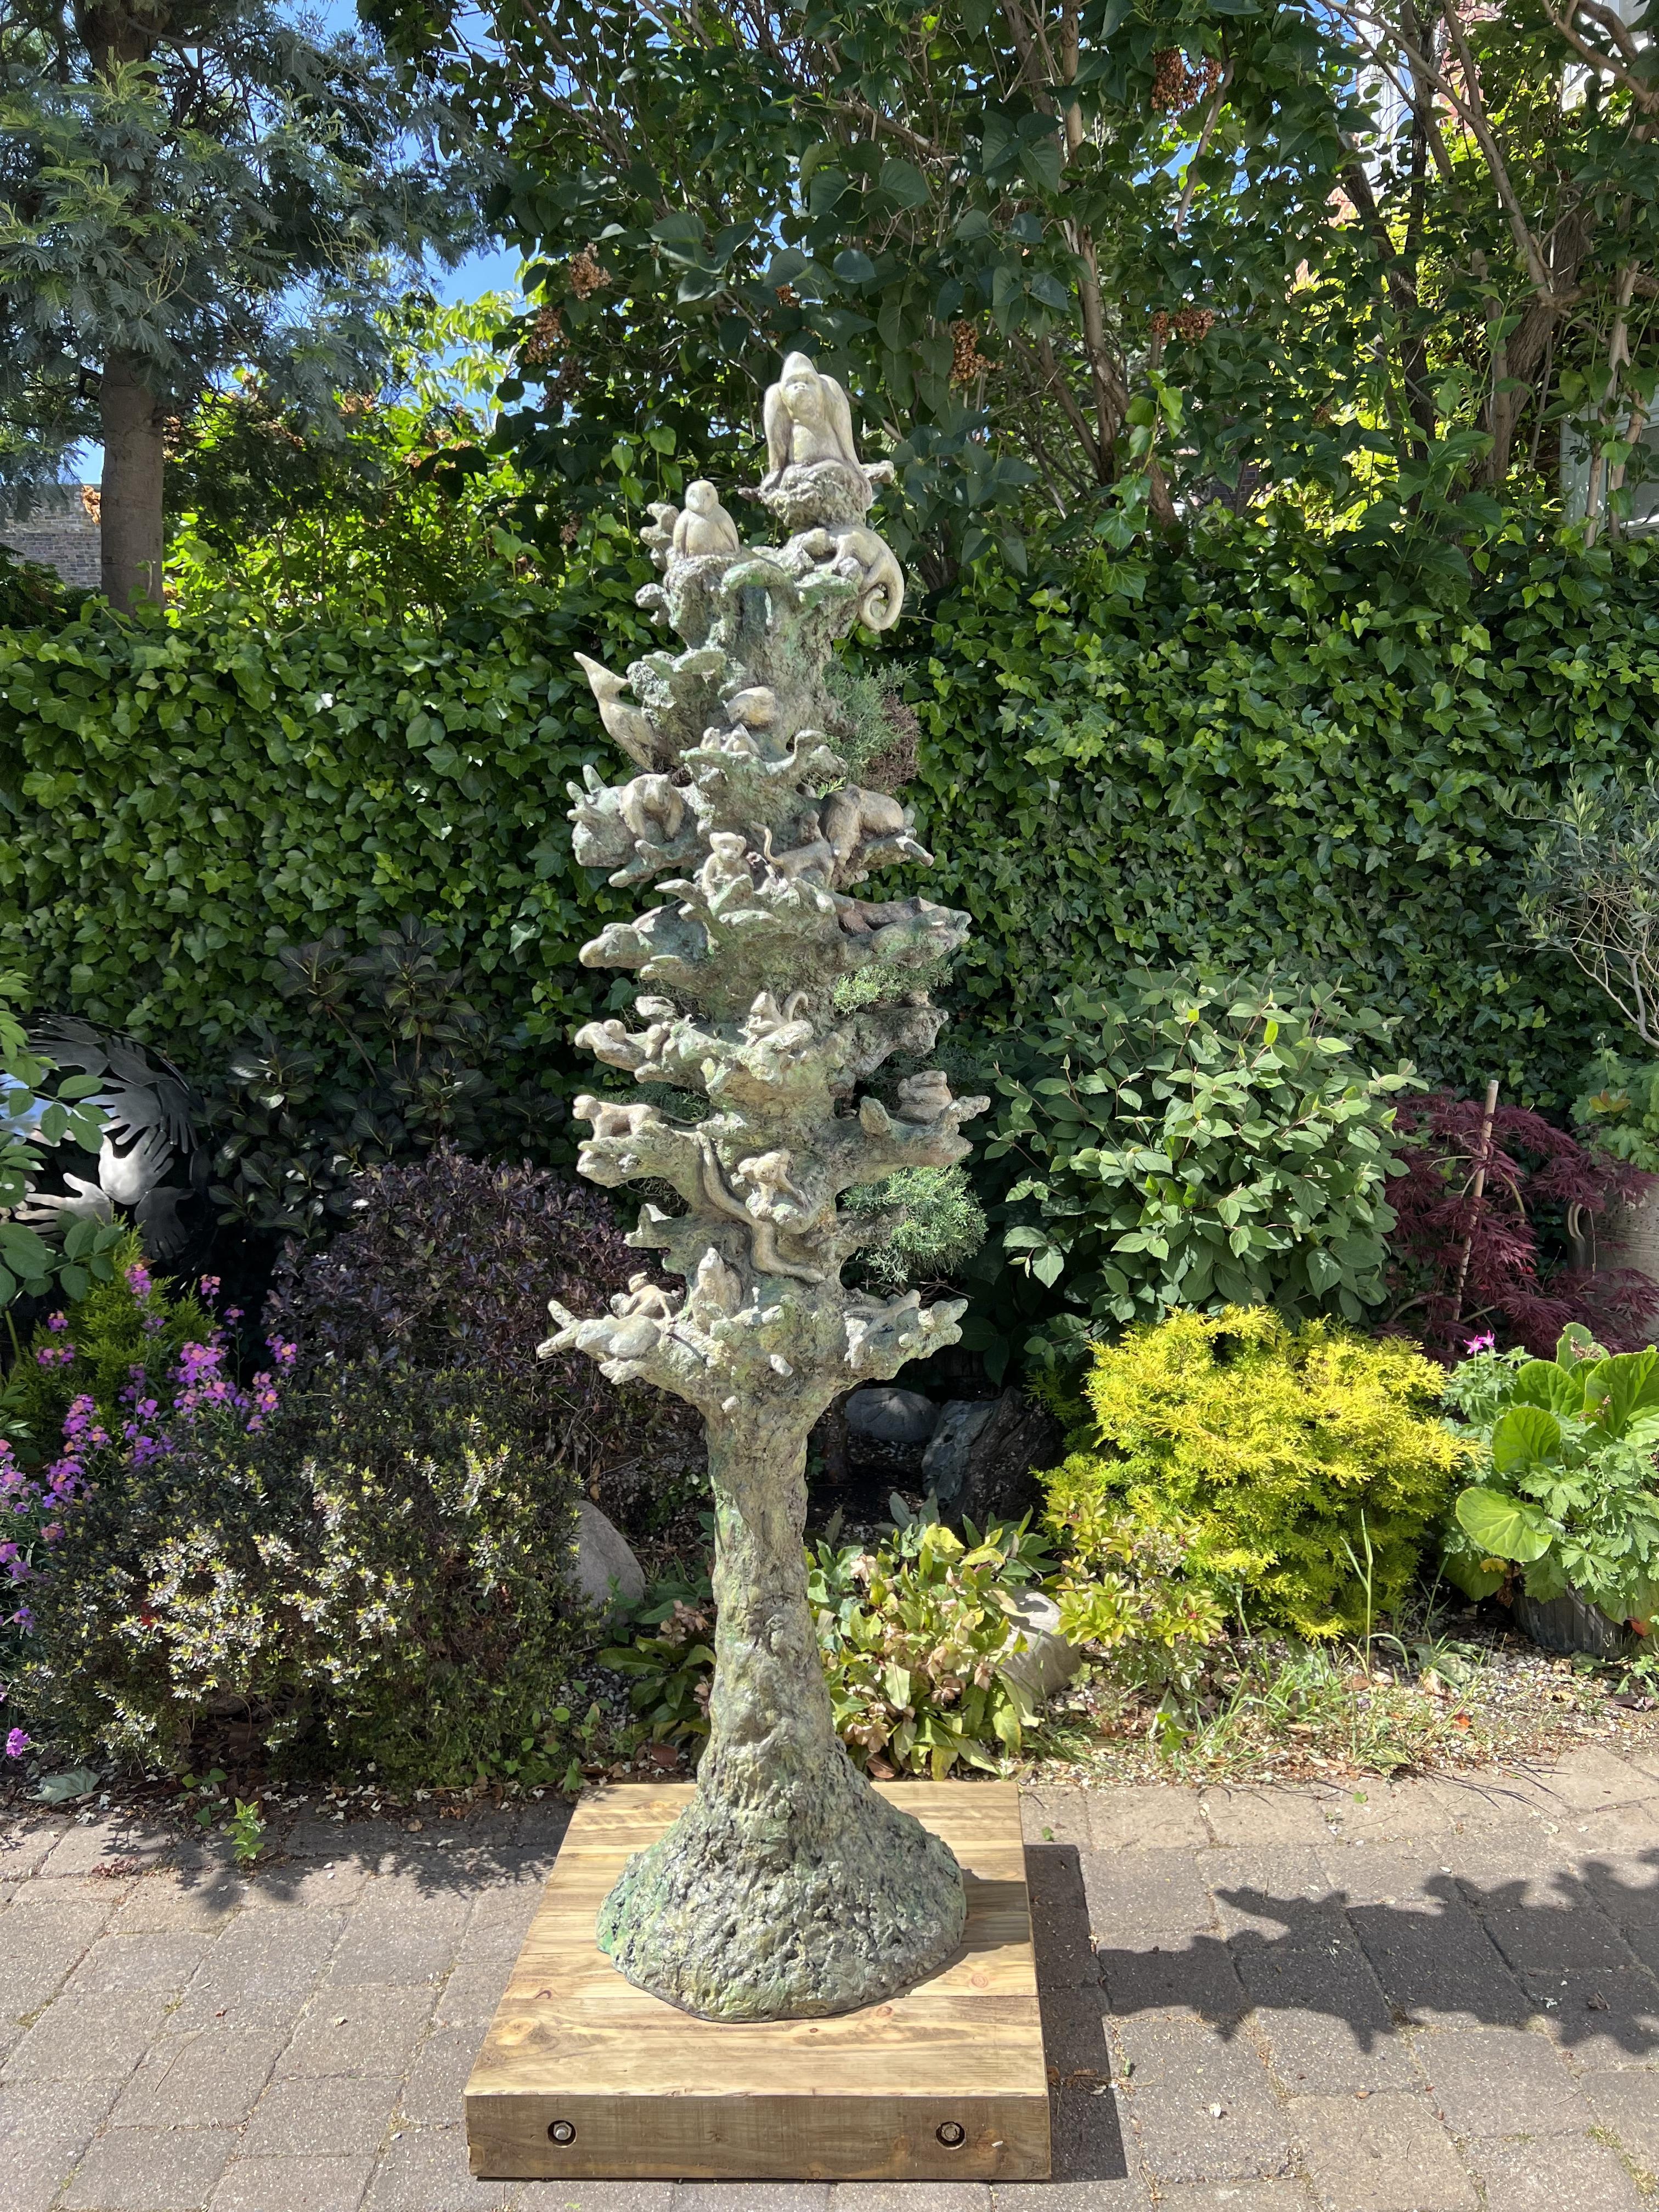 'Climbmate' is a beautiful  garden and landscape substantial sculpture.  Standing tall at 2 meters this stunning artwork piece took over five months to create with meticulous detail. At the heart of the sculpture   stands a sculpted tree,  its